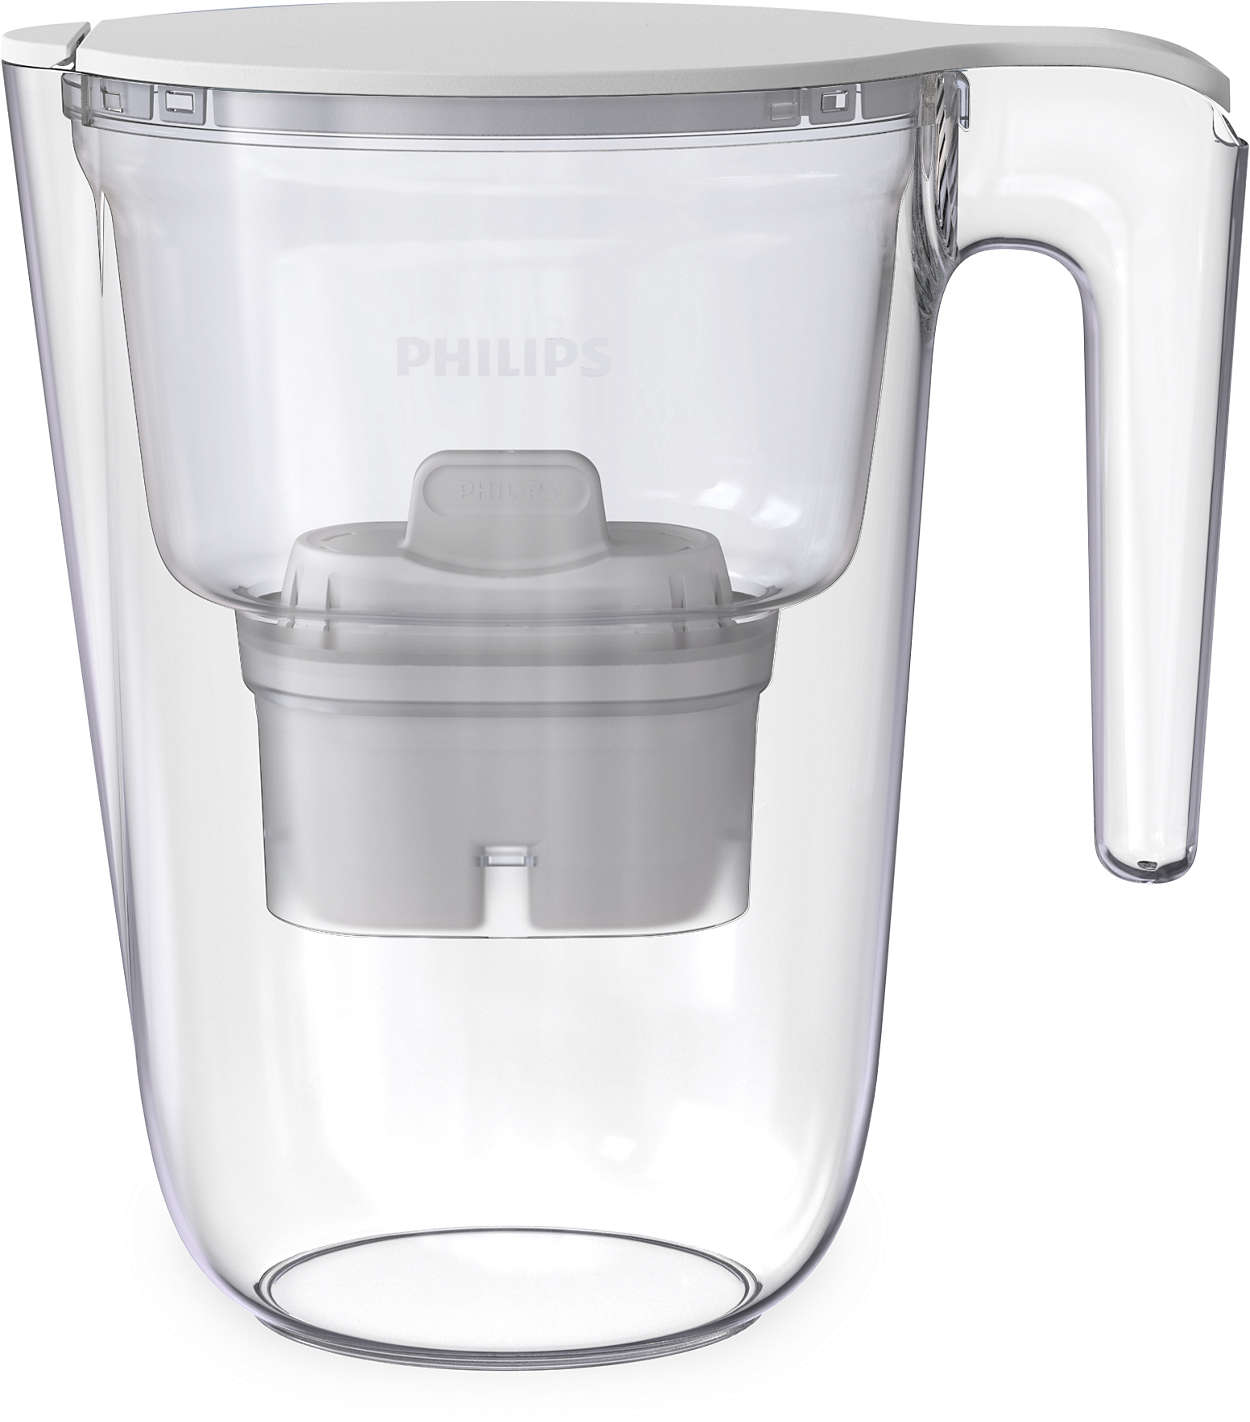 Philips Water Filter Pitcher/Jug 200L Filtration Capacity For Fresh/Clean Water 